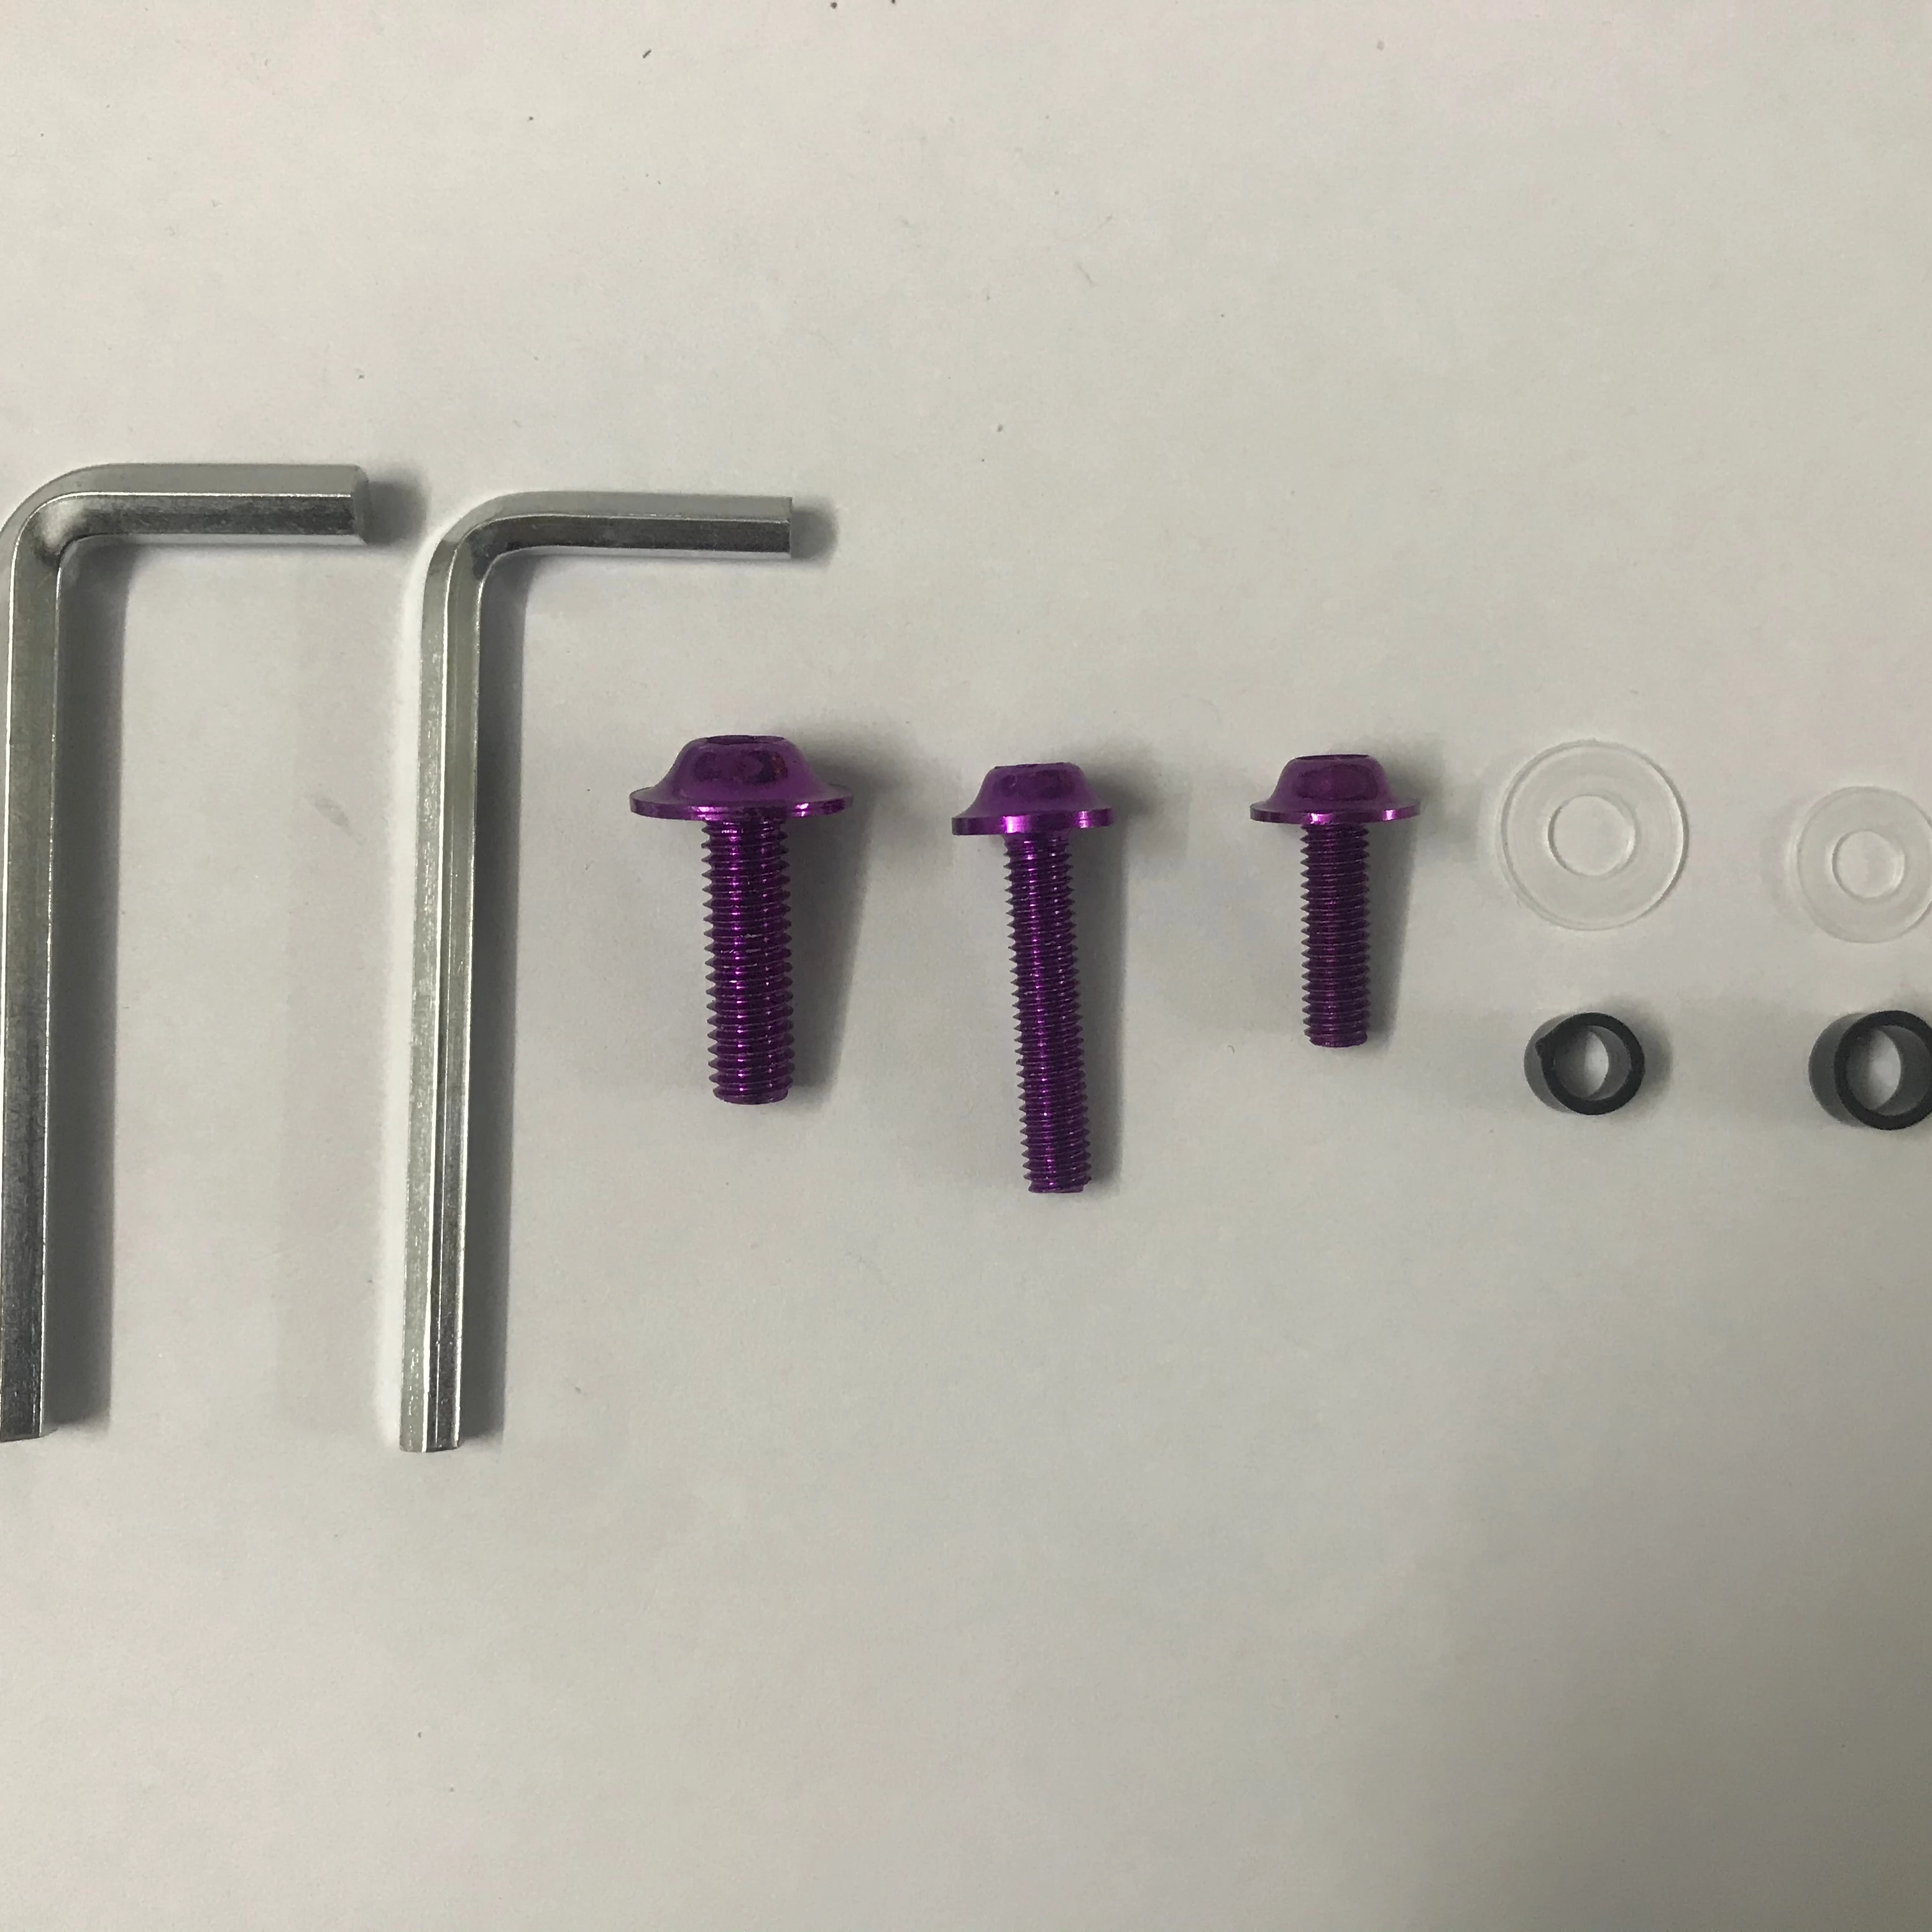 

2021 WHSC Hot Selling Wholesale purple Good Big CC Street Sports Bike Motorcycle Screw Kit Lag Kit Bolt Kit 155PCS In One Box, Unpainted color: white color